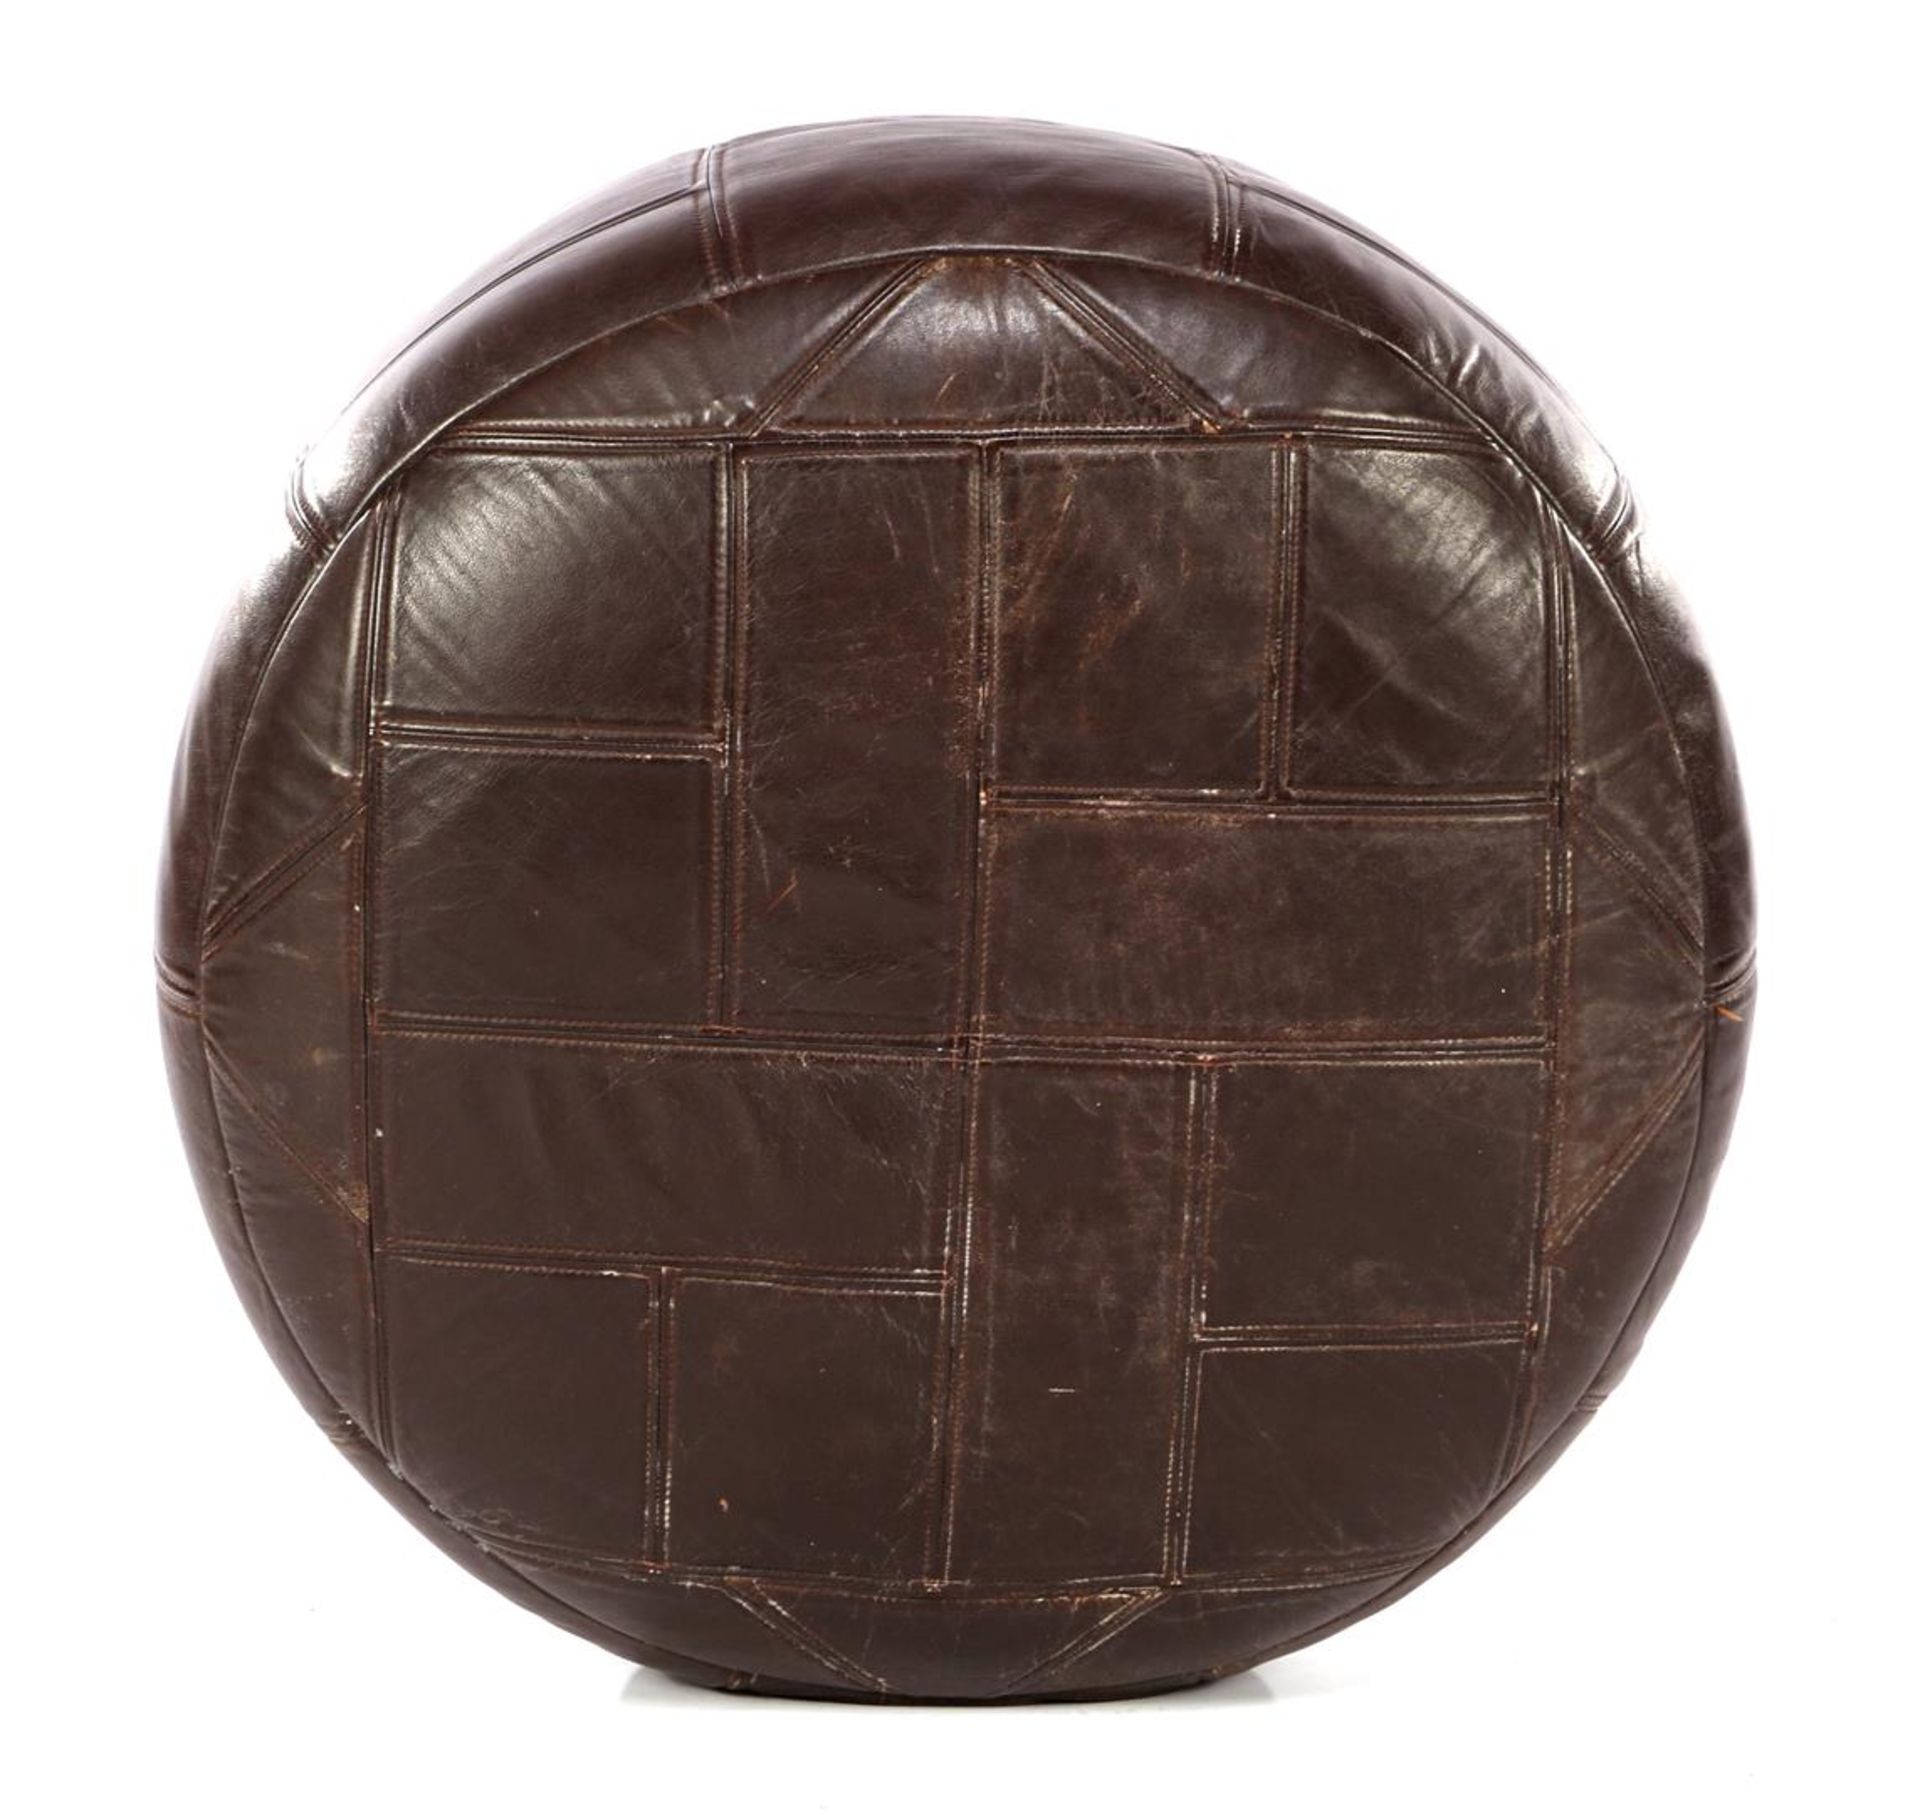 Brown leather patchwork pouf - Image 2 of 2